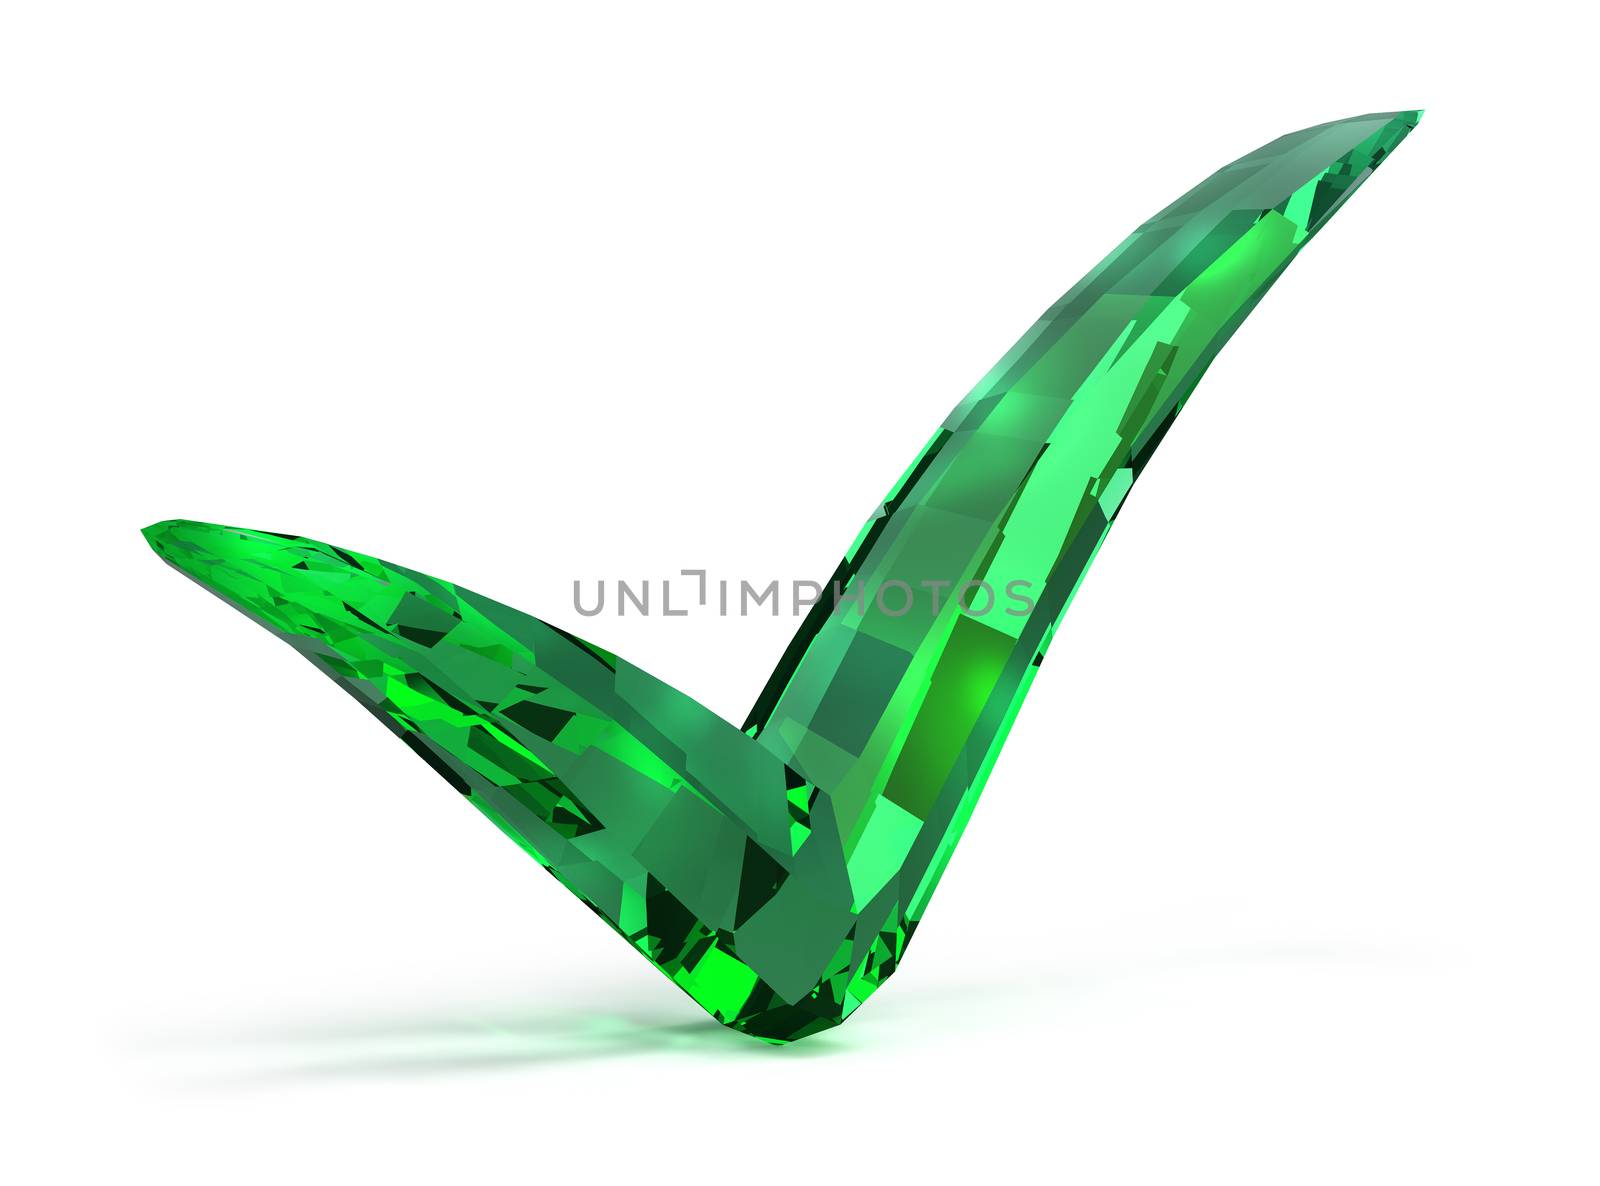 emerald checked. 3d image. Isolated white background.